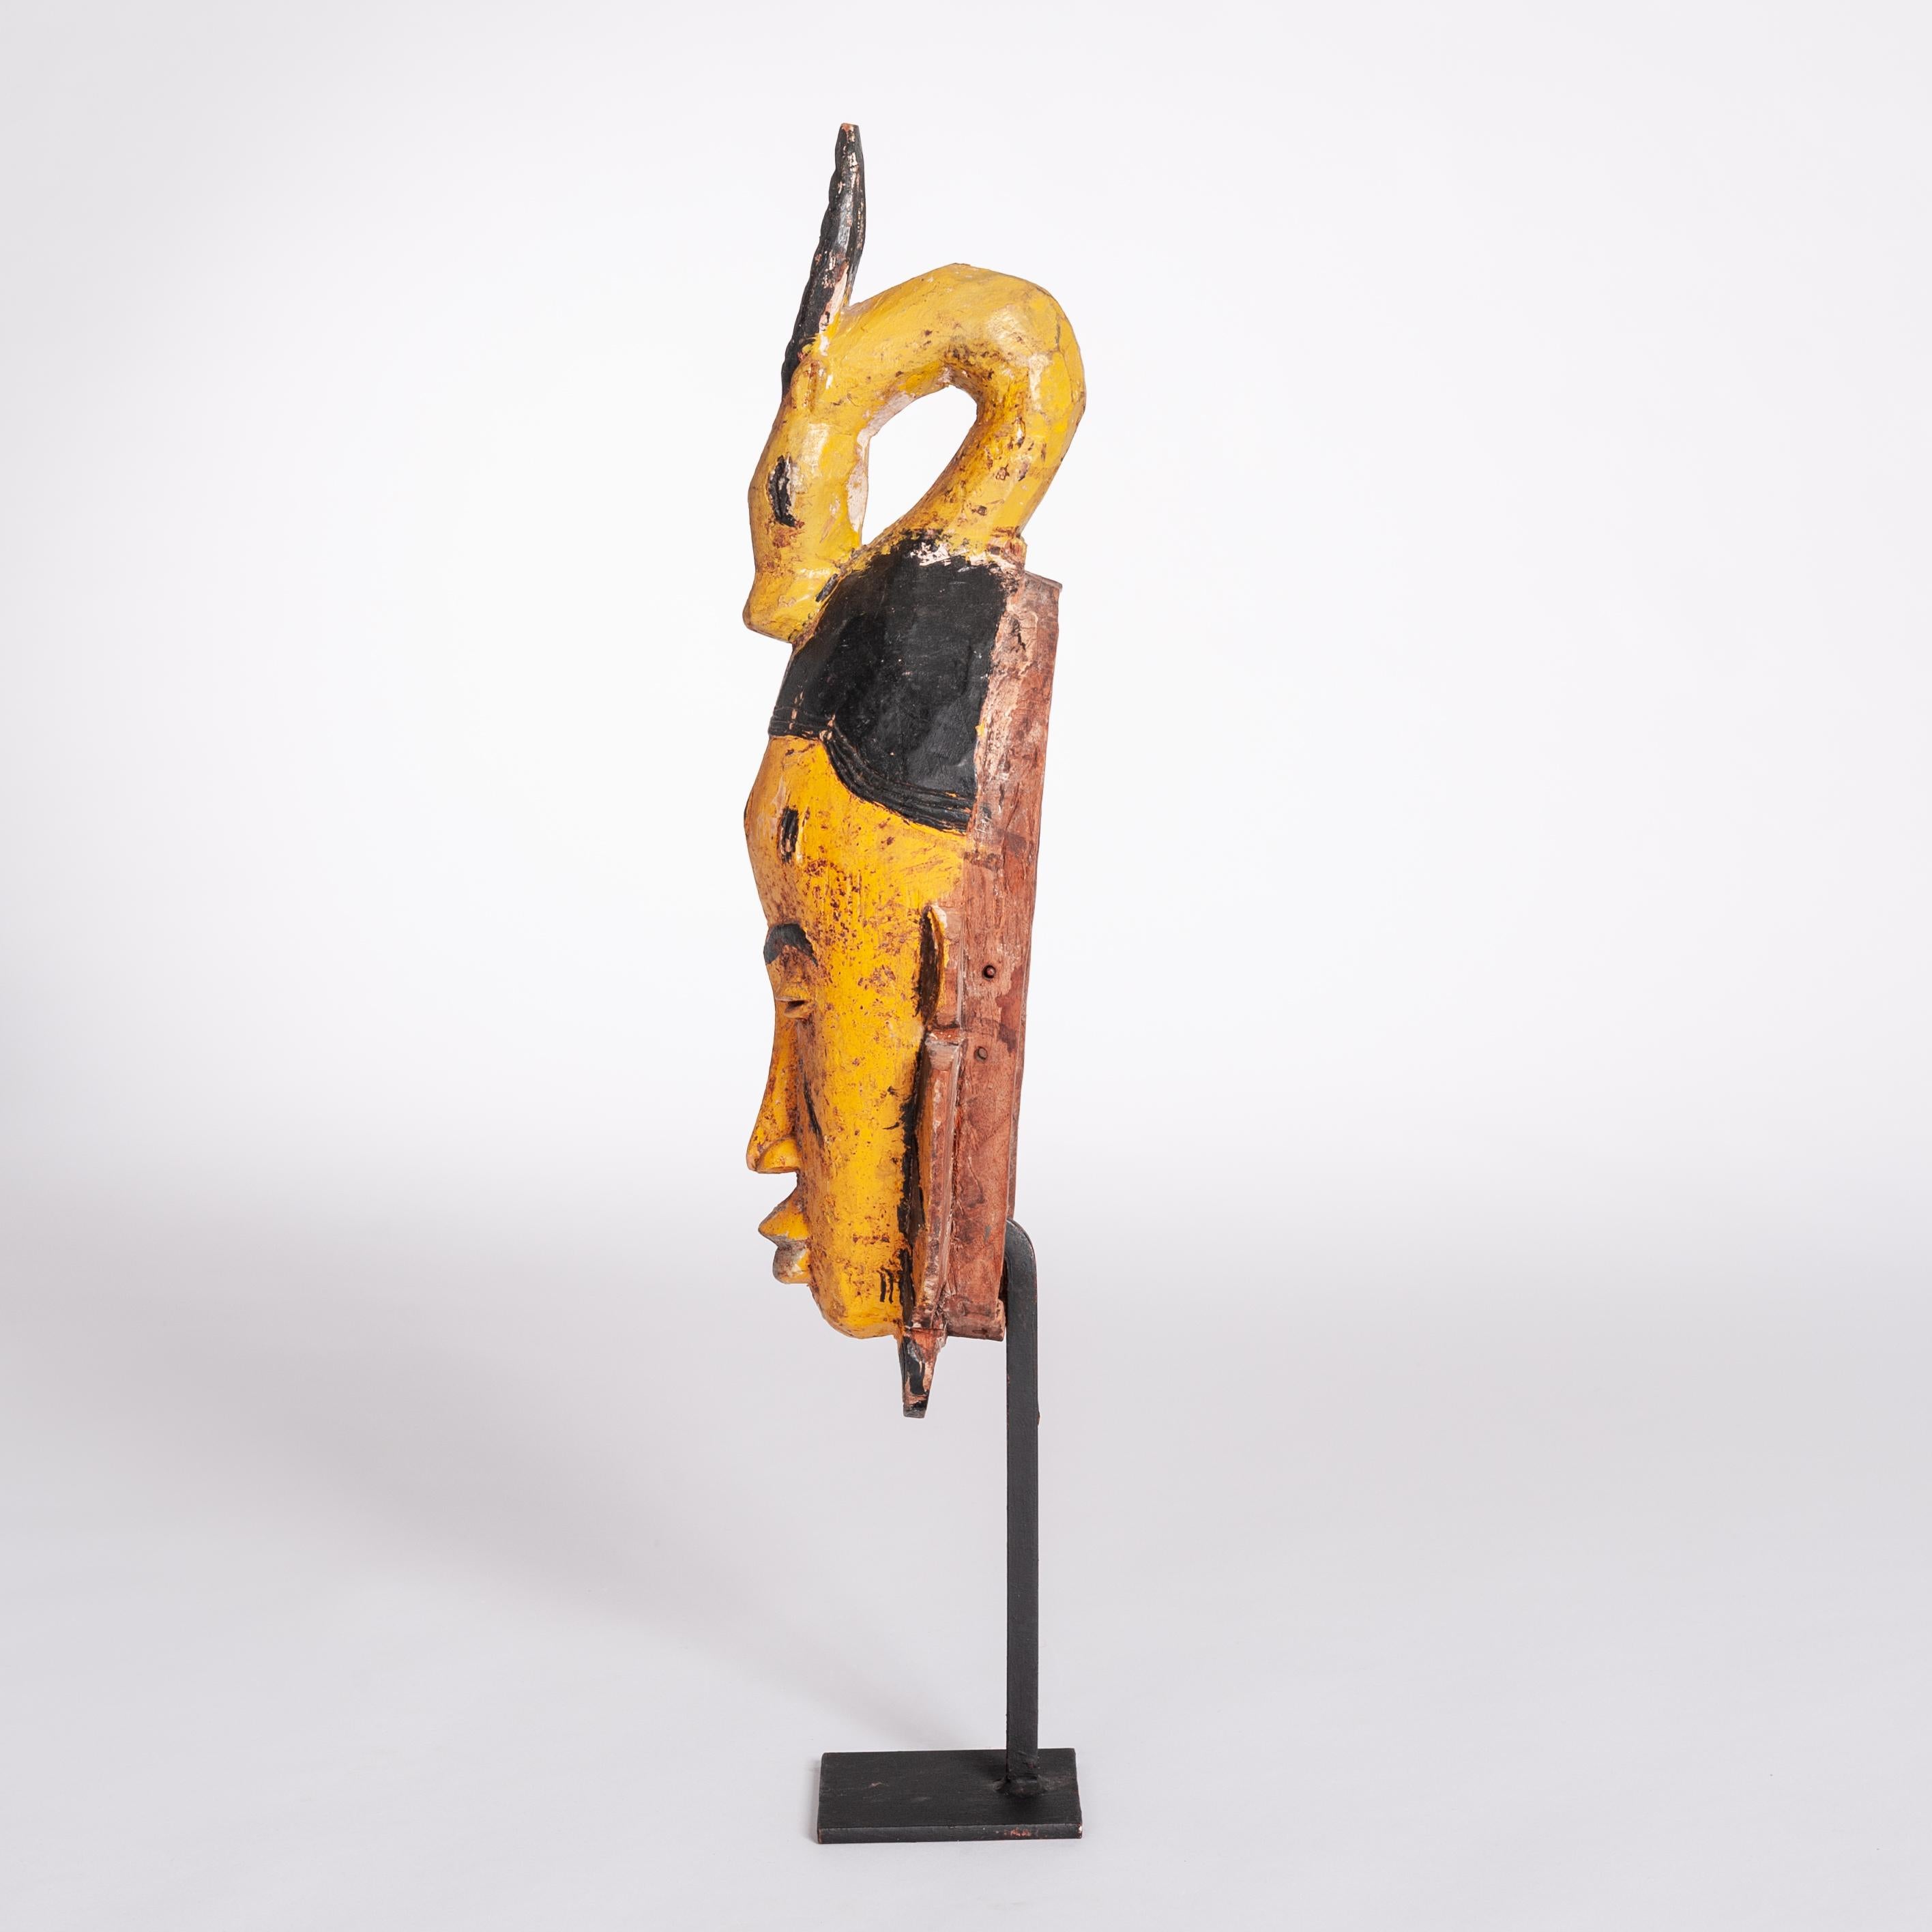 Late 20th Century Mid-Century Baoule Tribal Mask in Yellow-Black with Antelope Head Decoration For Sale